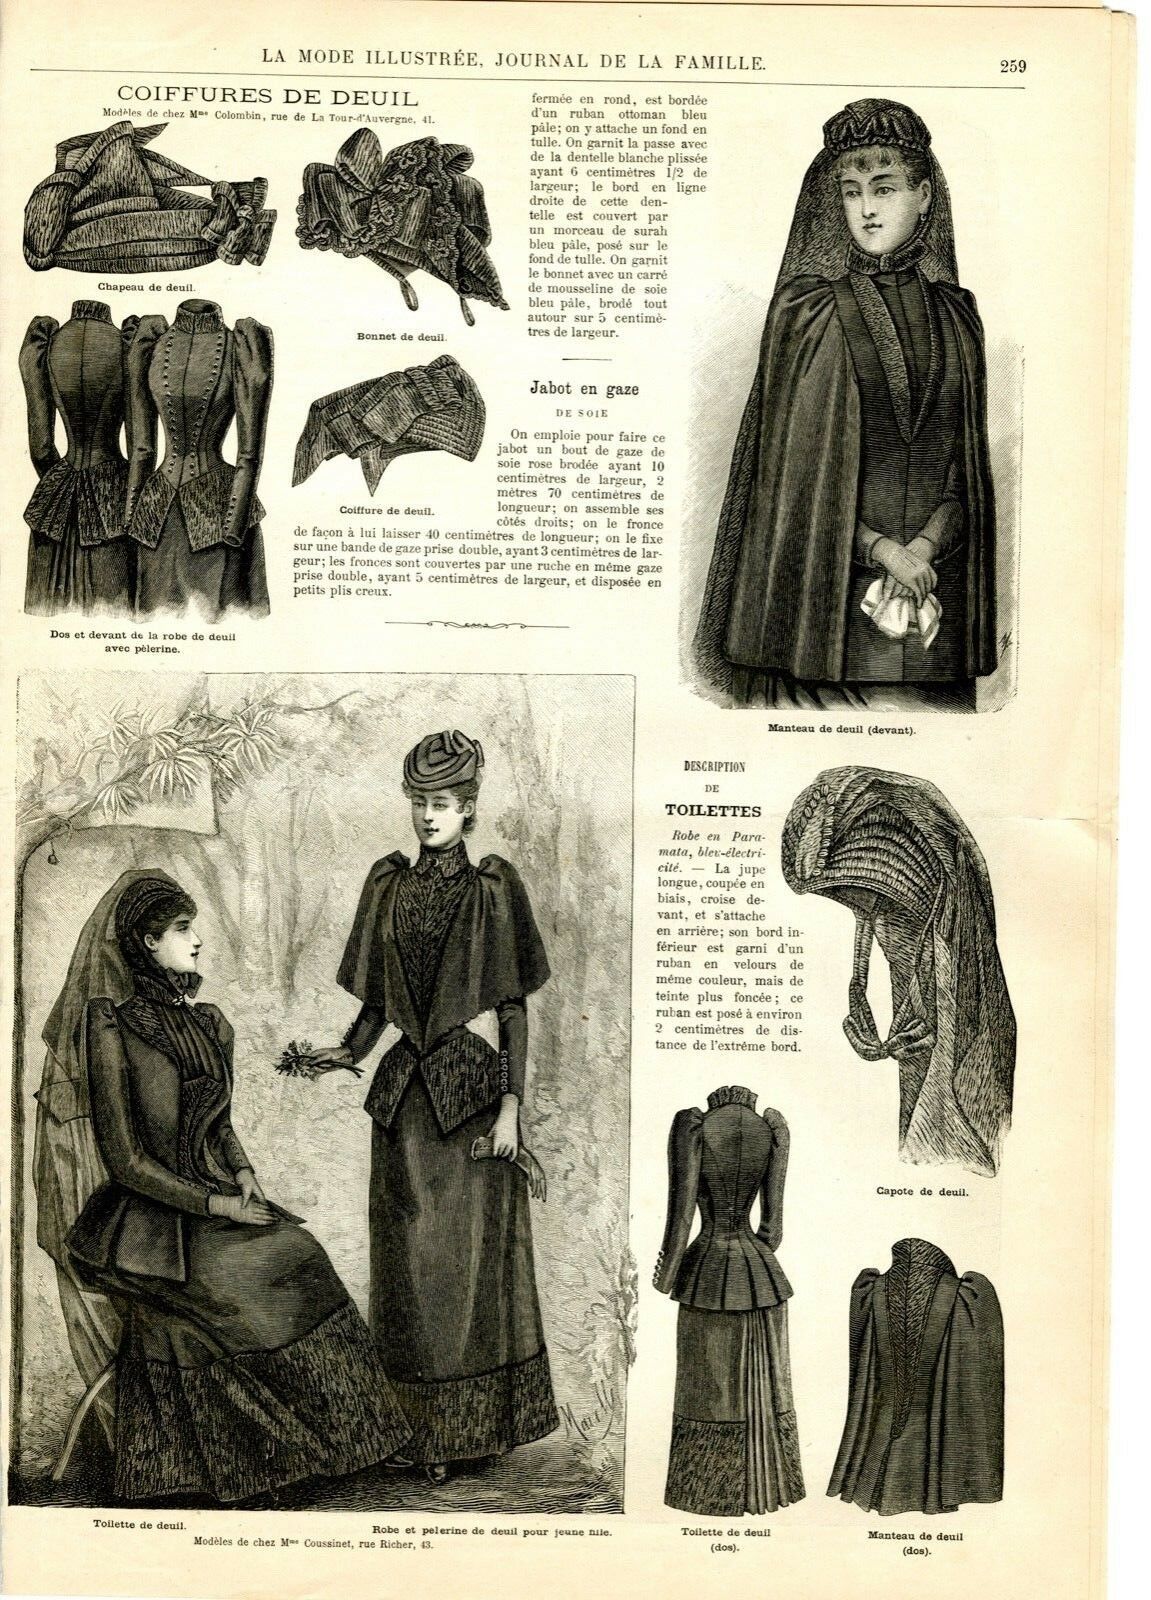 Victorian mourning clothing and customs - Recollections Blog